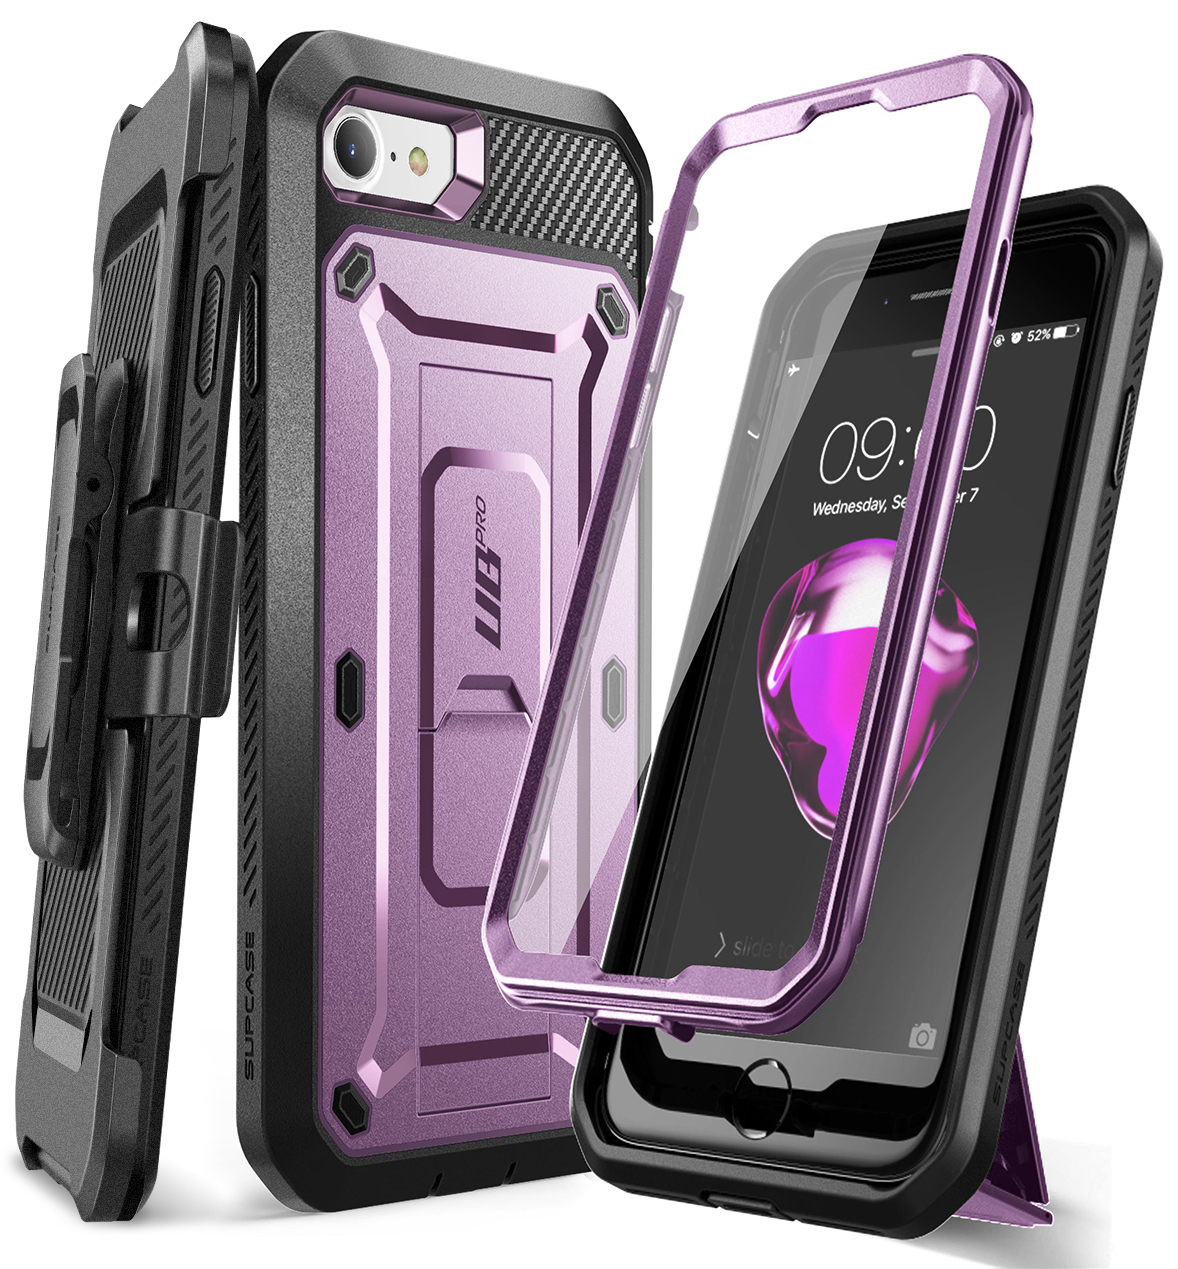 SupCase Unicorn Beetle Pro Series Case Designed for iPhone SE (2022/2020) / iPhone 7 / iPhone 8, Built-in Screen Protector Full-Body Rugged Holster & Kickstand Case (Violte) - image 1 of 8